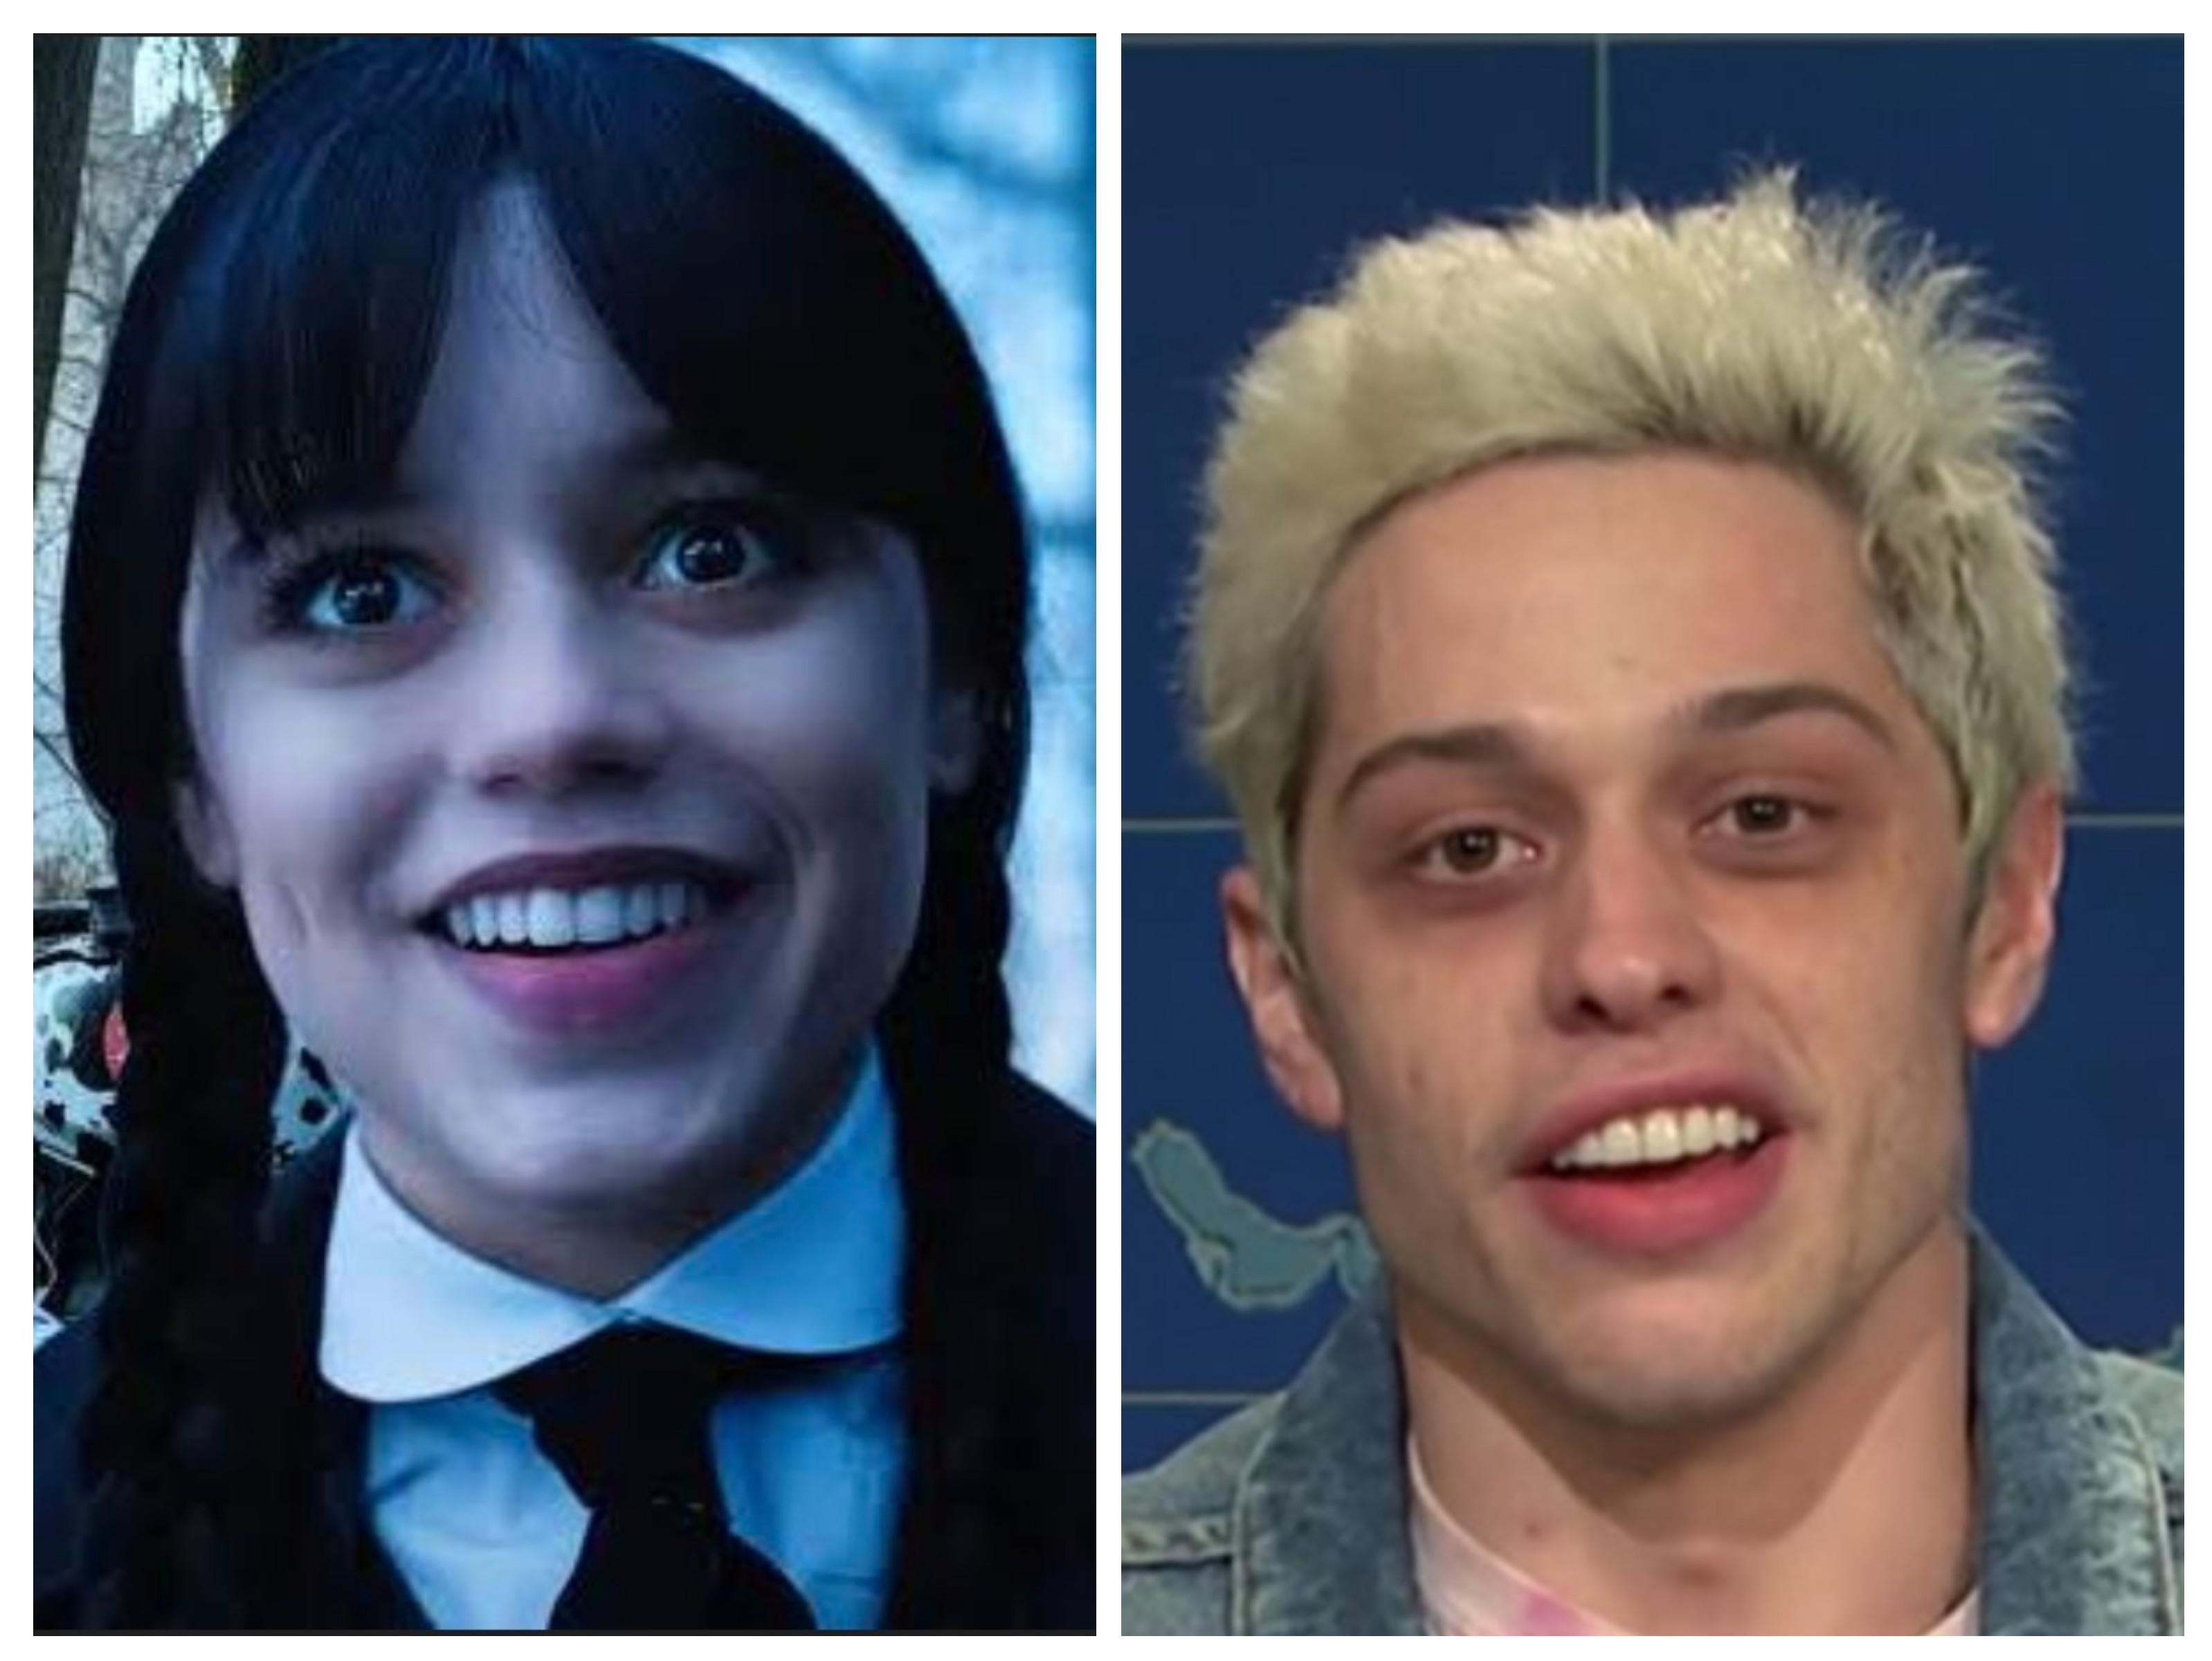 I was getting Pete Davidson vibes from this Wednesday Addams photo